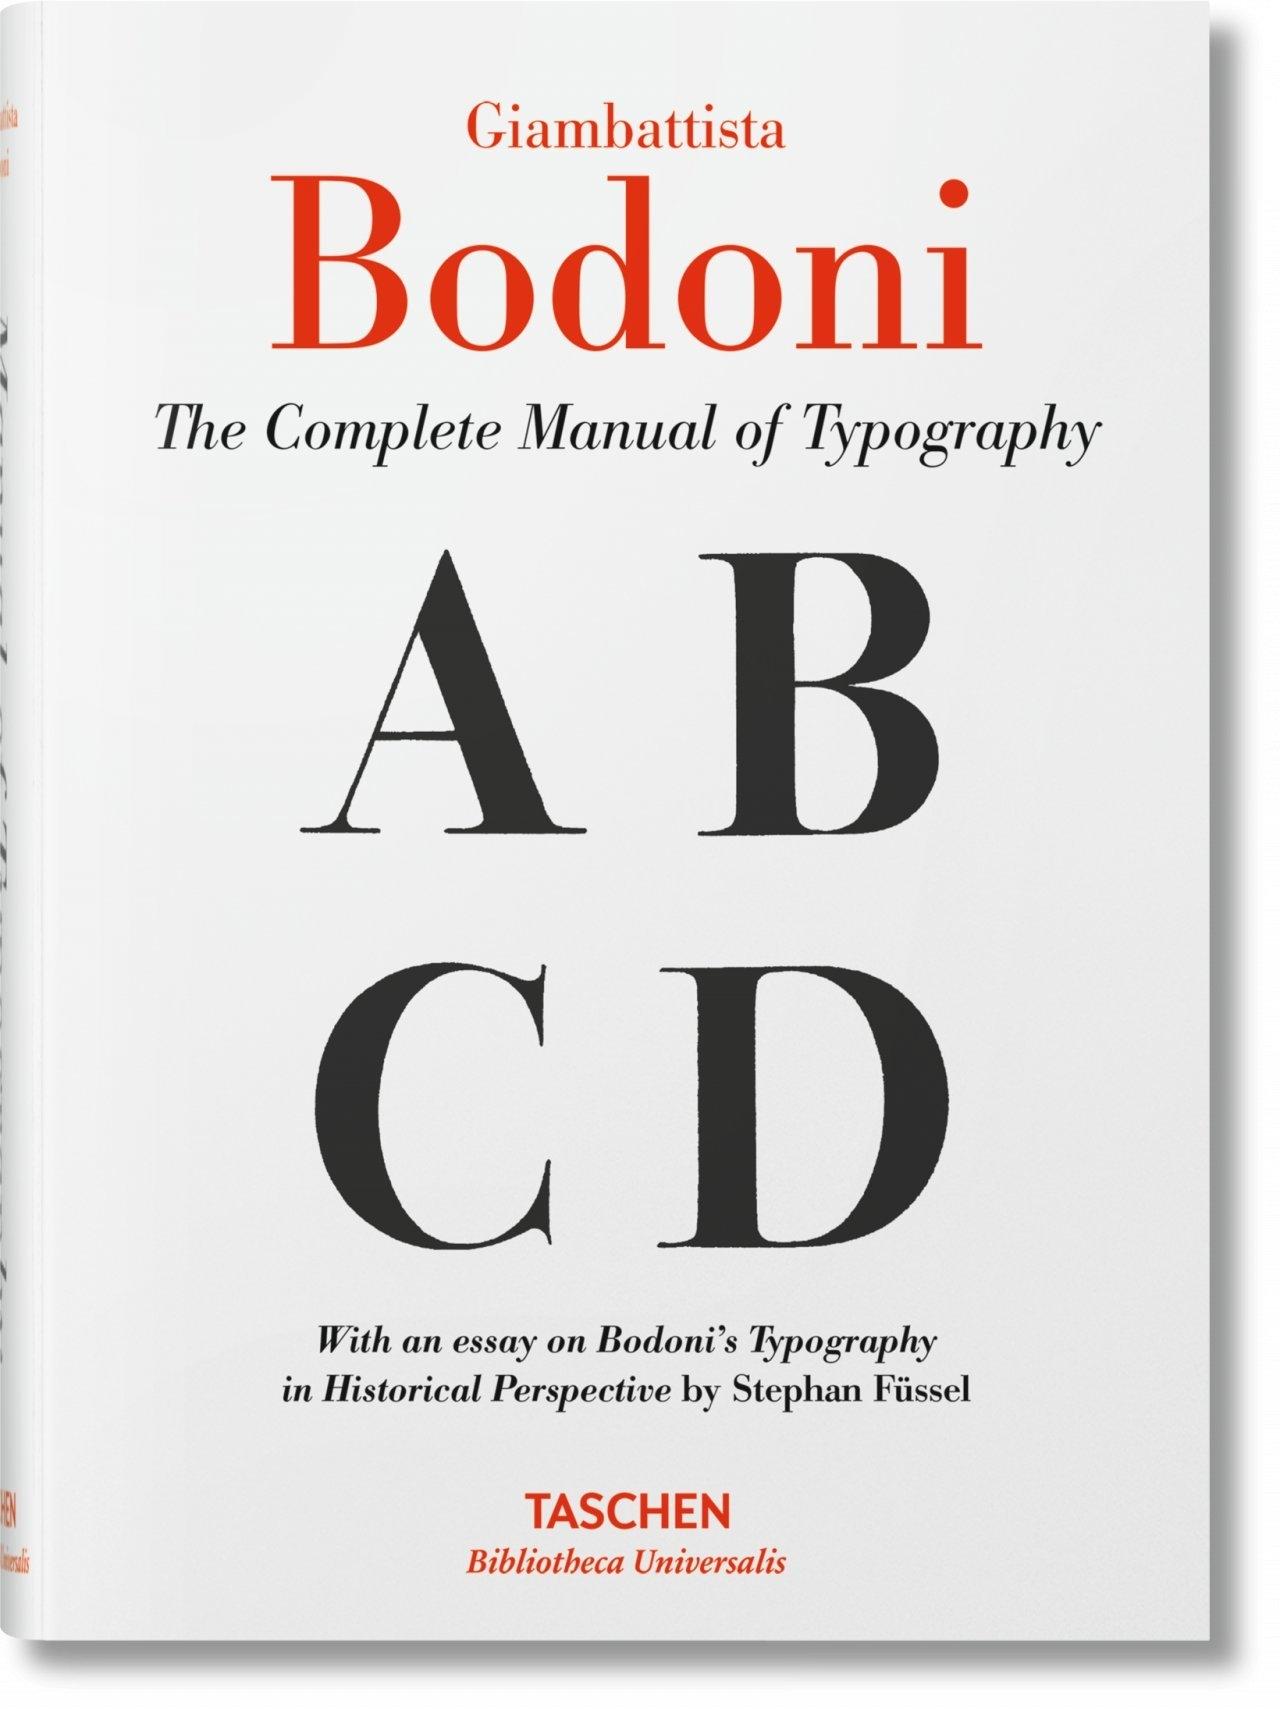 MANUAL OF TYPOGRAPHY "MANUALE  TIPOGRAFICO 1818". 